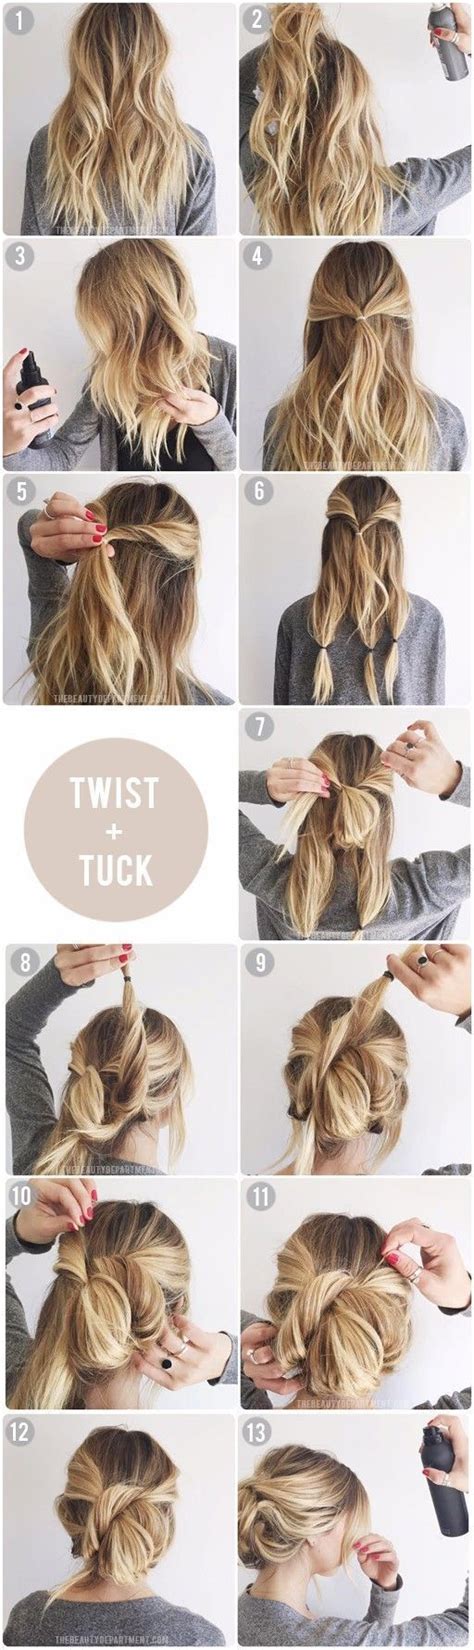 Perfect How To Put Your Hair Up For Summer With Simple Style